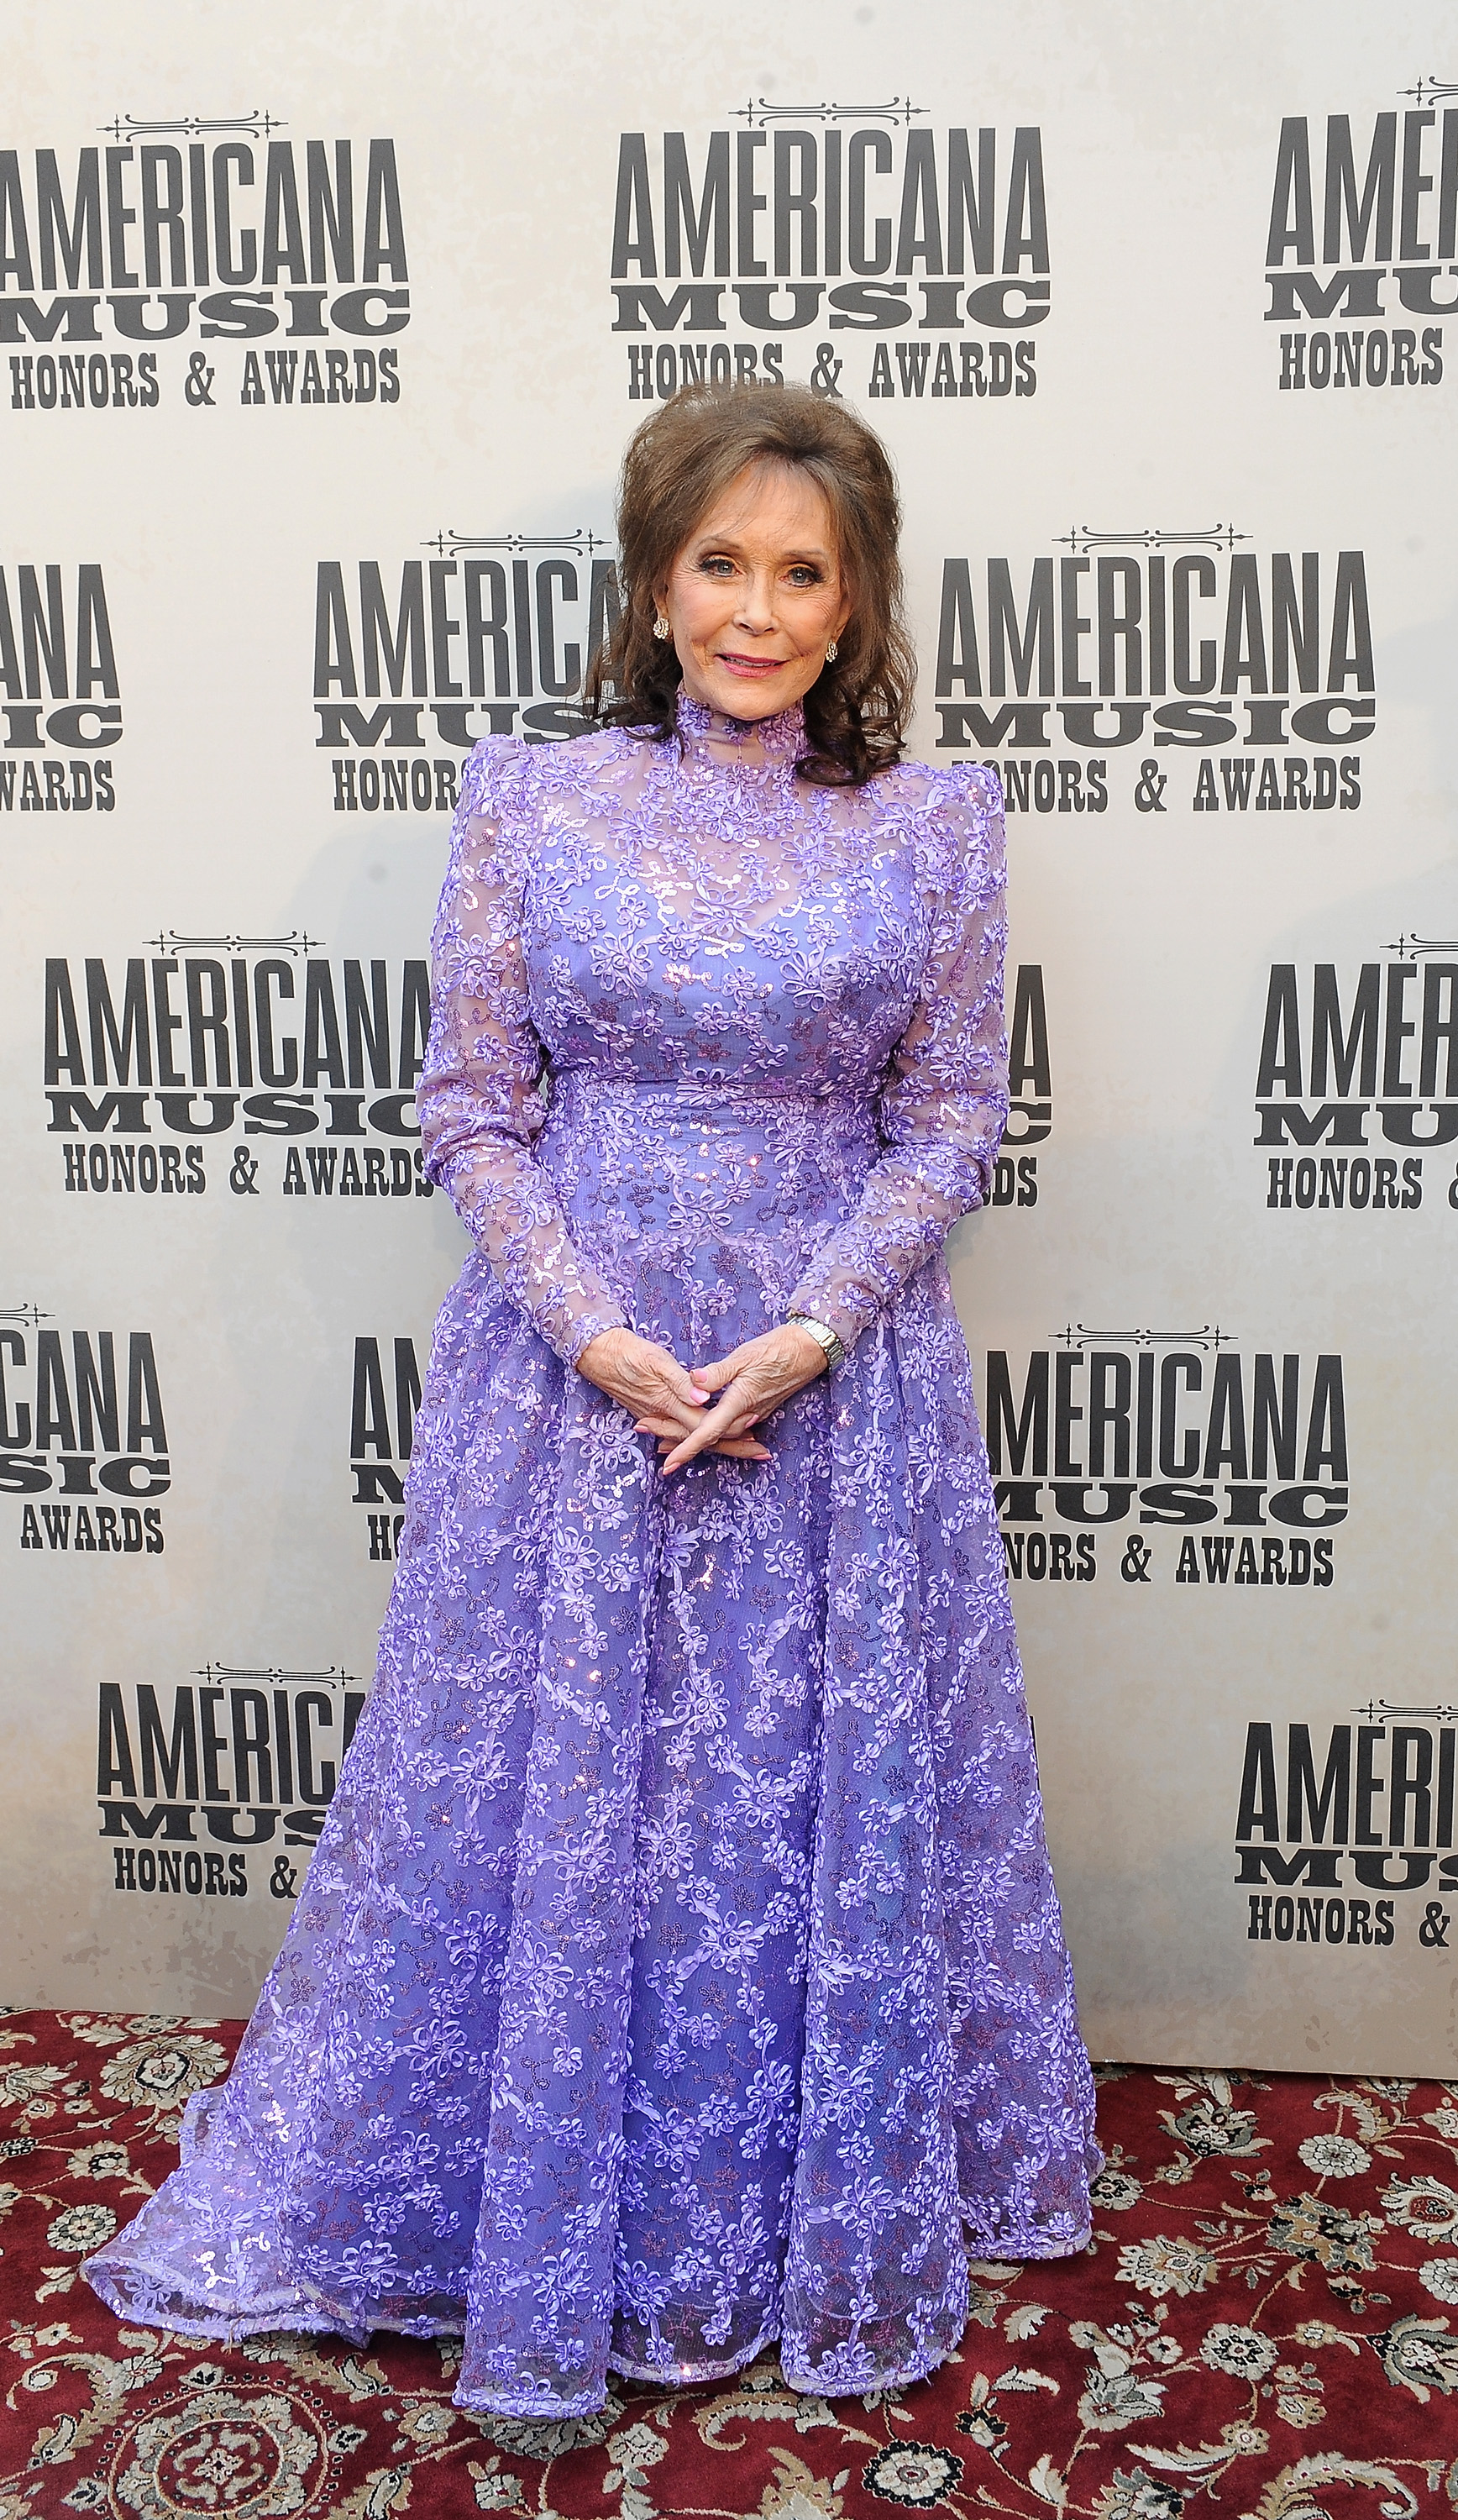 Loretta Lynn attends the 13th annual Americana Music Association Honors and Awards Show at the Ryman Auditorium in Nashville, Tennessee, on September 17, 2014. | Source: Getty Images